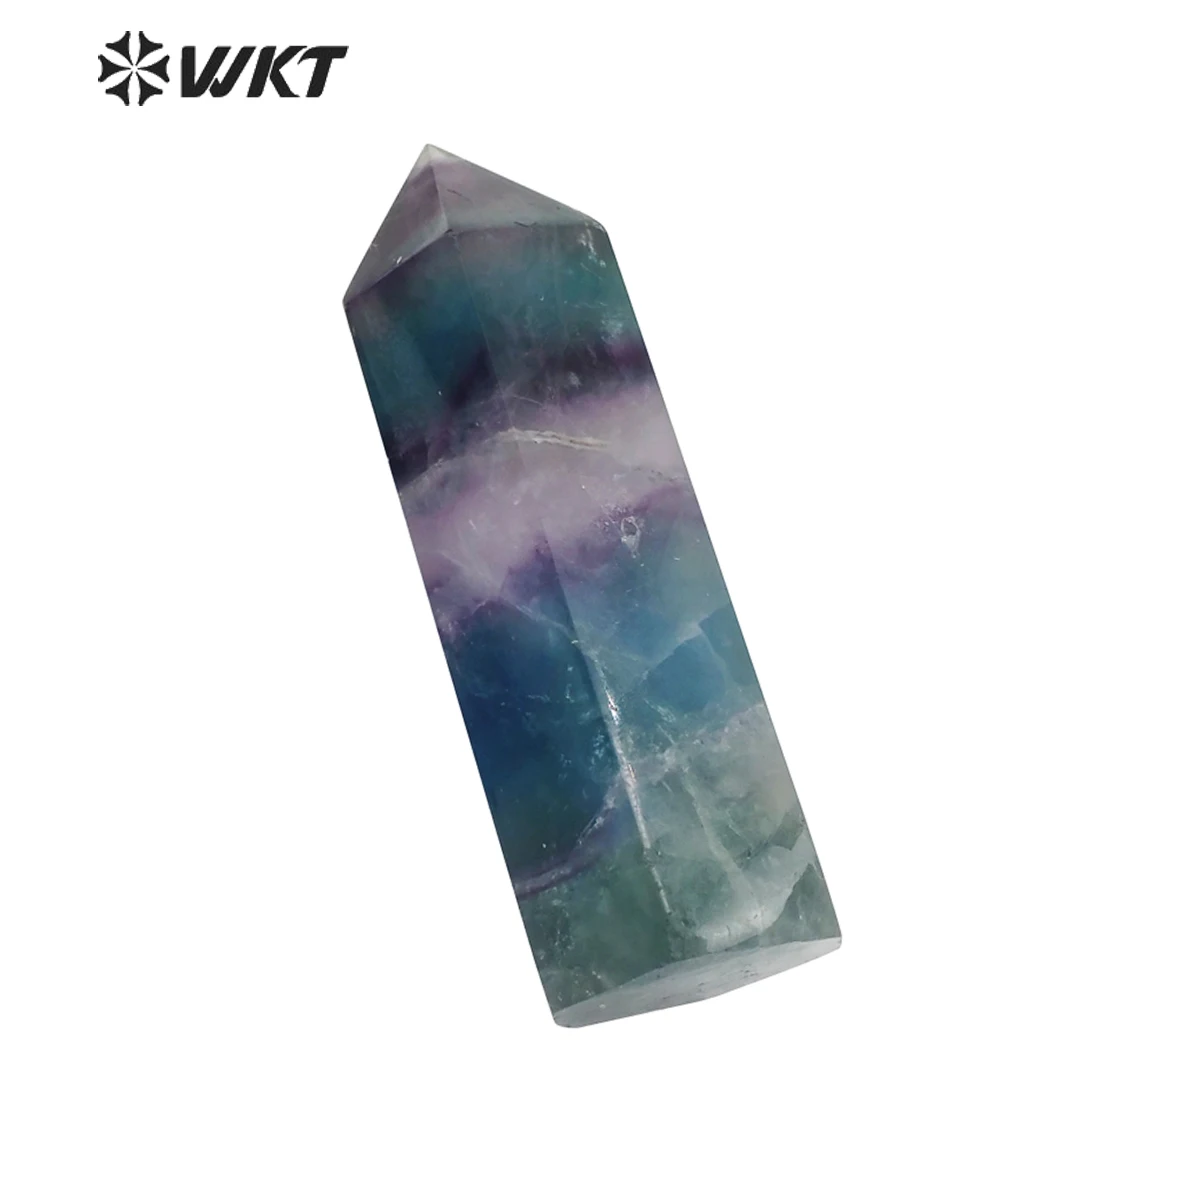 WT-G263 WKT  New High Quality Natural Transparent Stone Starry Color Beautiful Gift Decoration Accessories